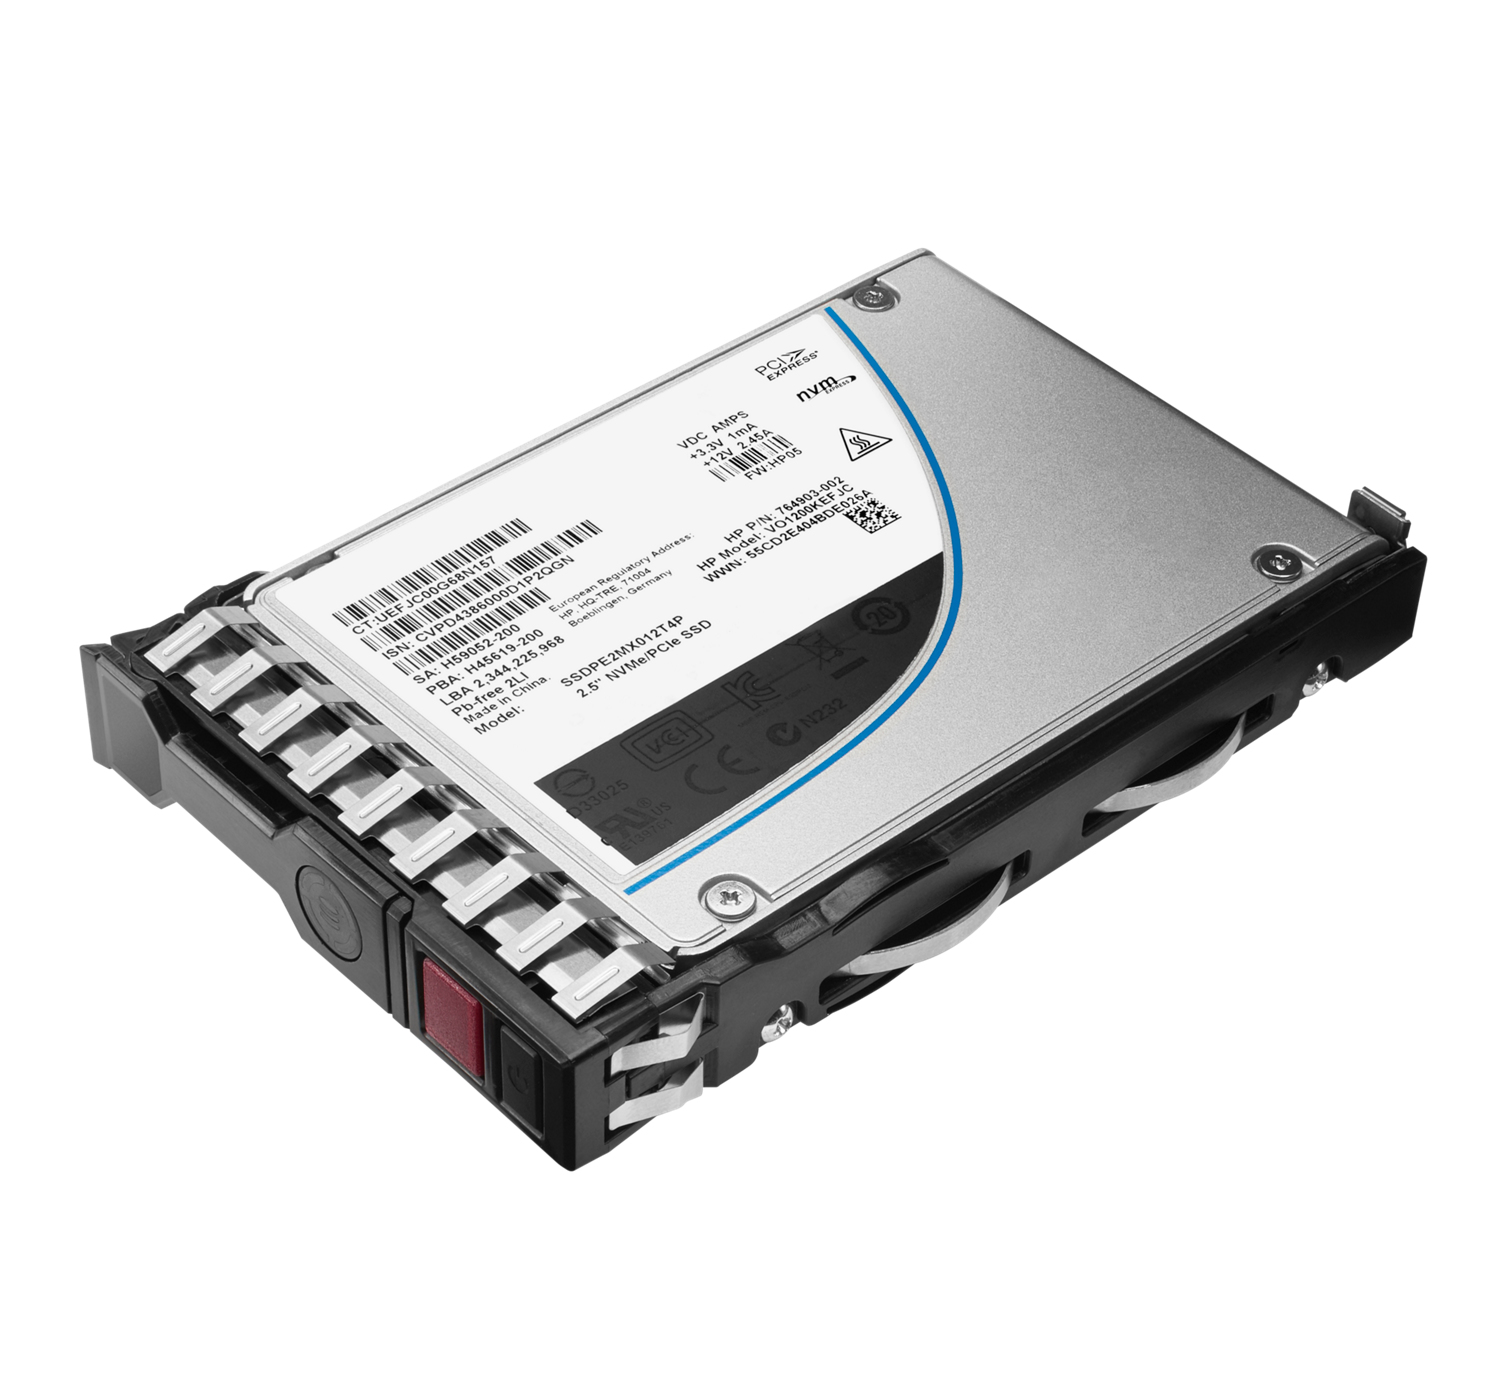 HPE Mixed Use High Performance Universal Connect - SSD - 6.4 TB - Hot-Swap - 2.5" SFF (6.4 cm SFF)